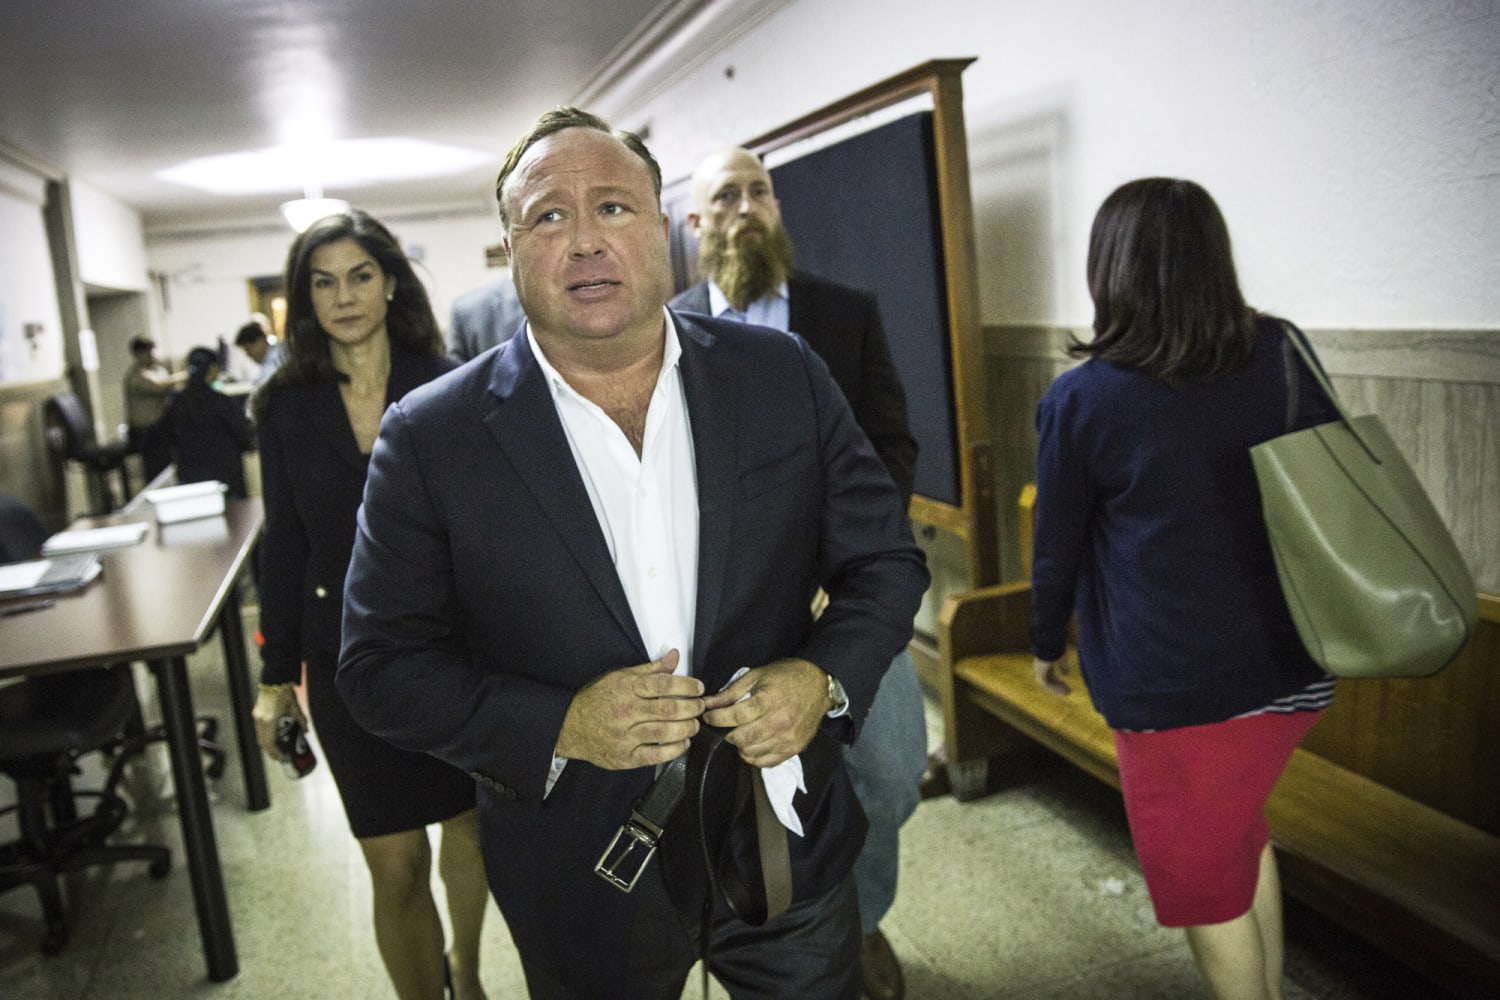 Facebook, YouTube and Apple remove Alex Jones and Infowars from their platforms